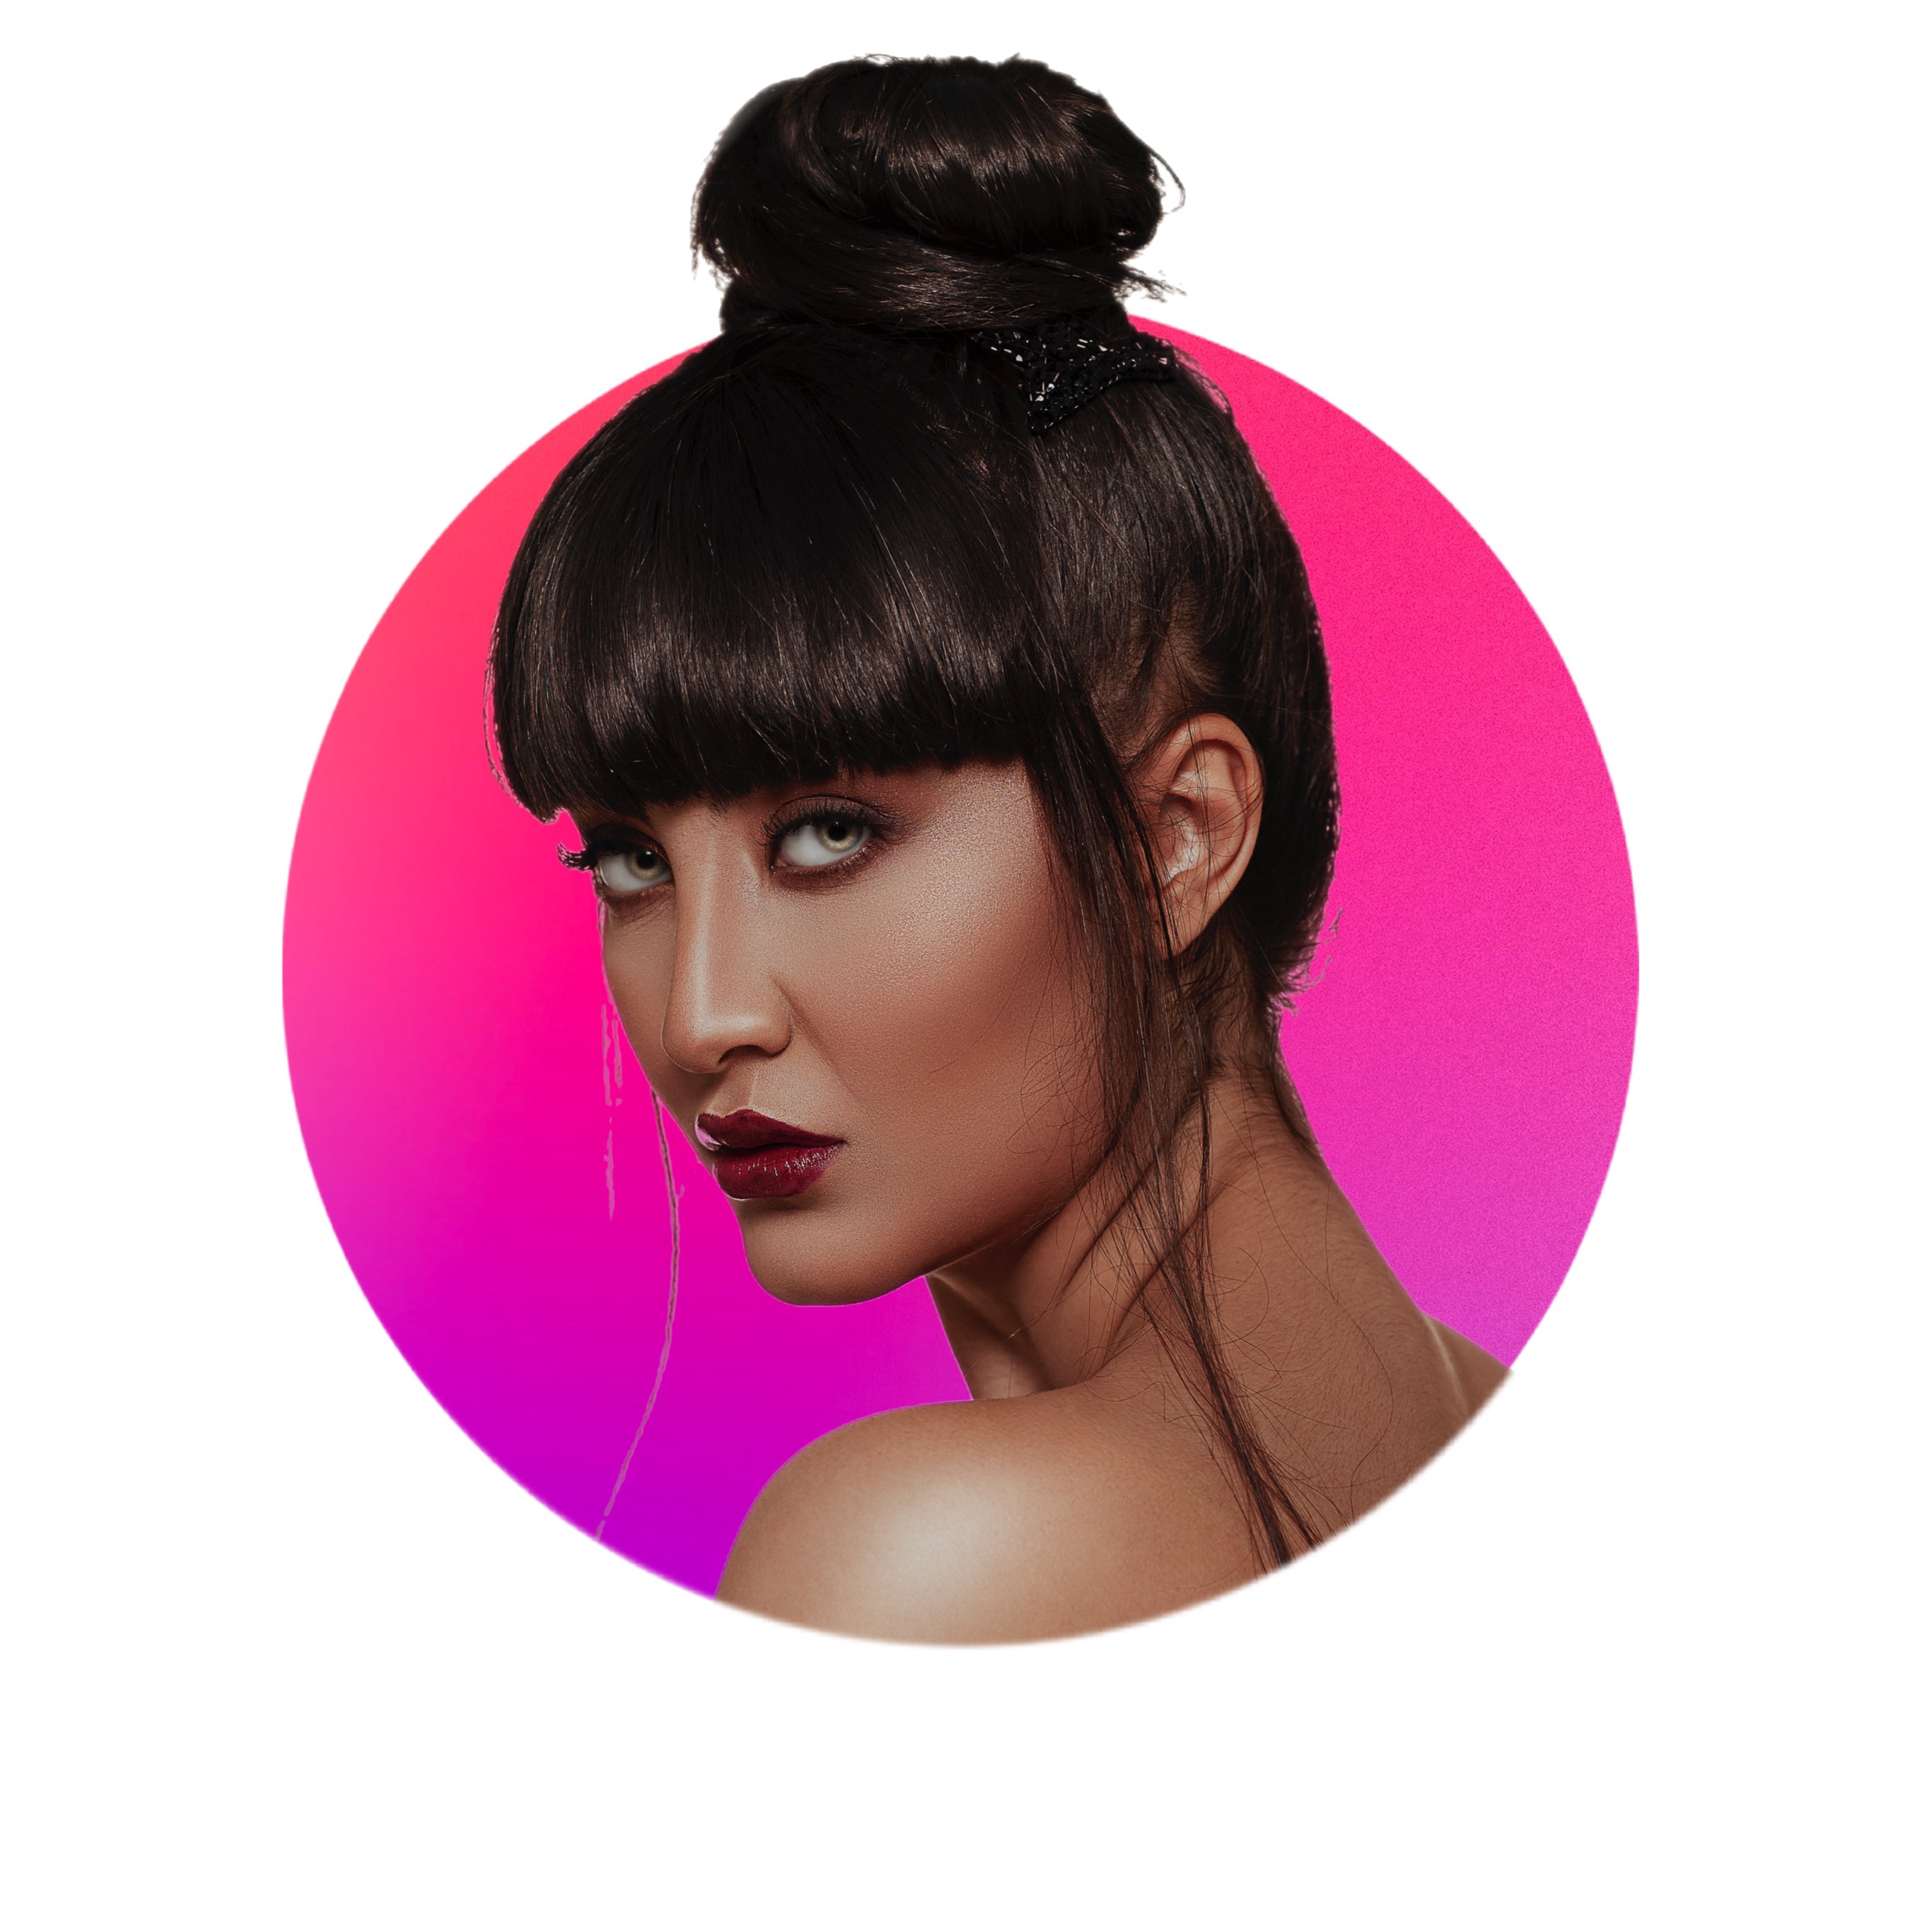 Profile Pic Round Pink Purple Circle With Woman